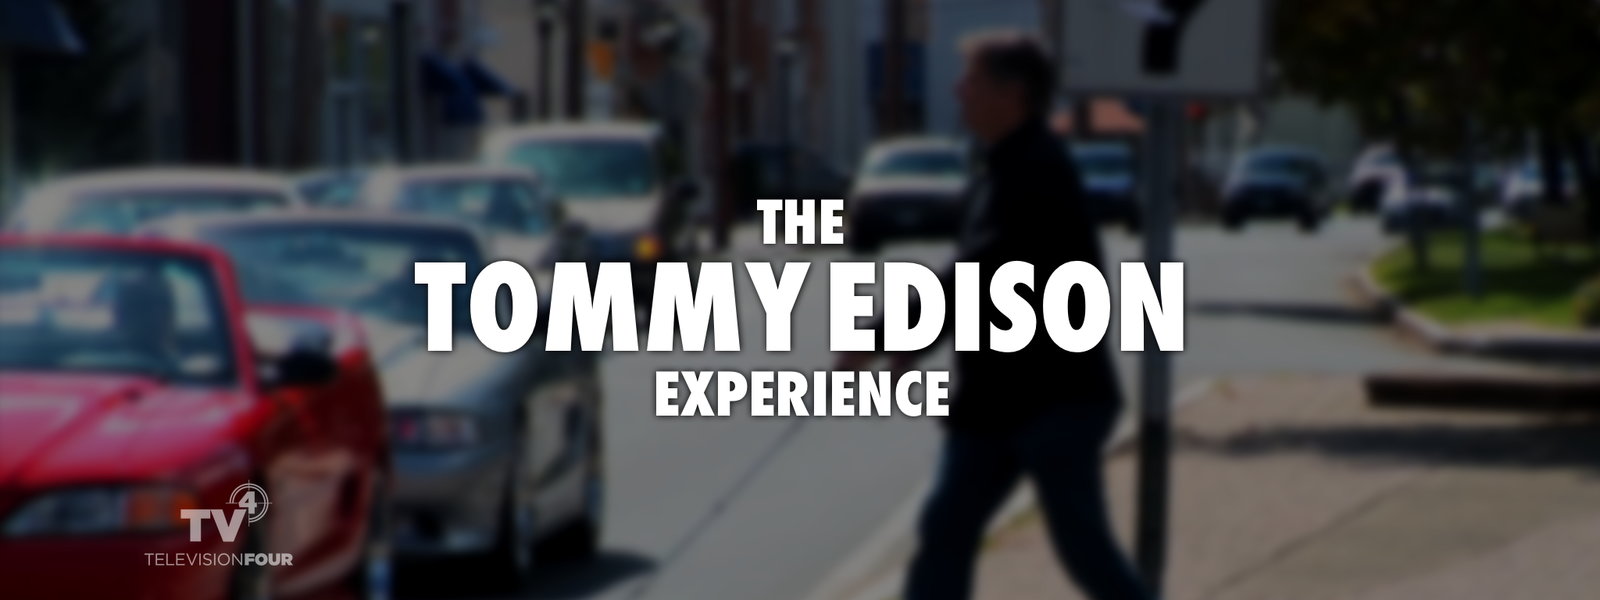 THE TOMMY EDISON EXPERIENCE